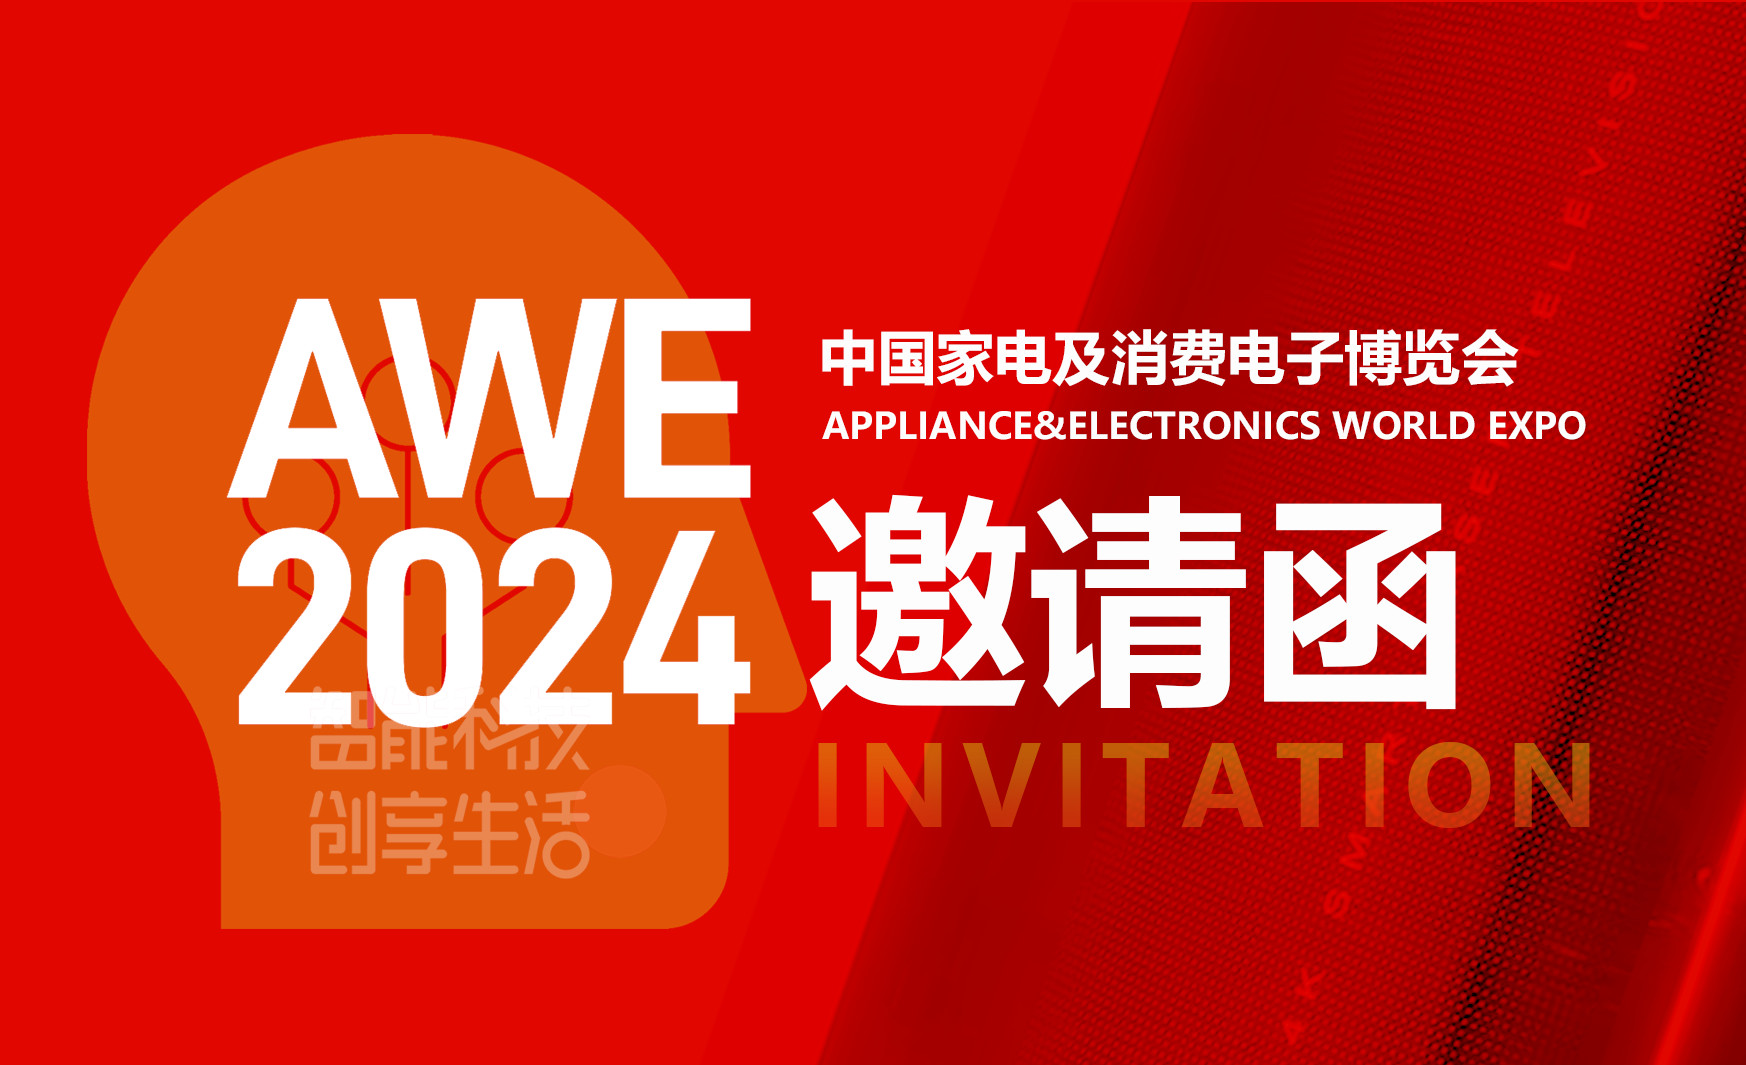 Inviting you to participate in AWE2024 exhibition